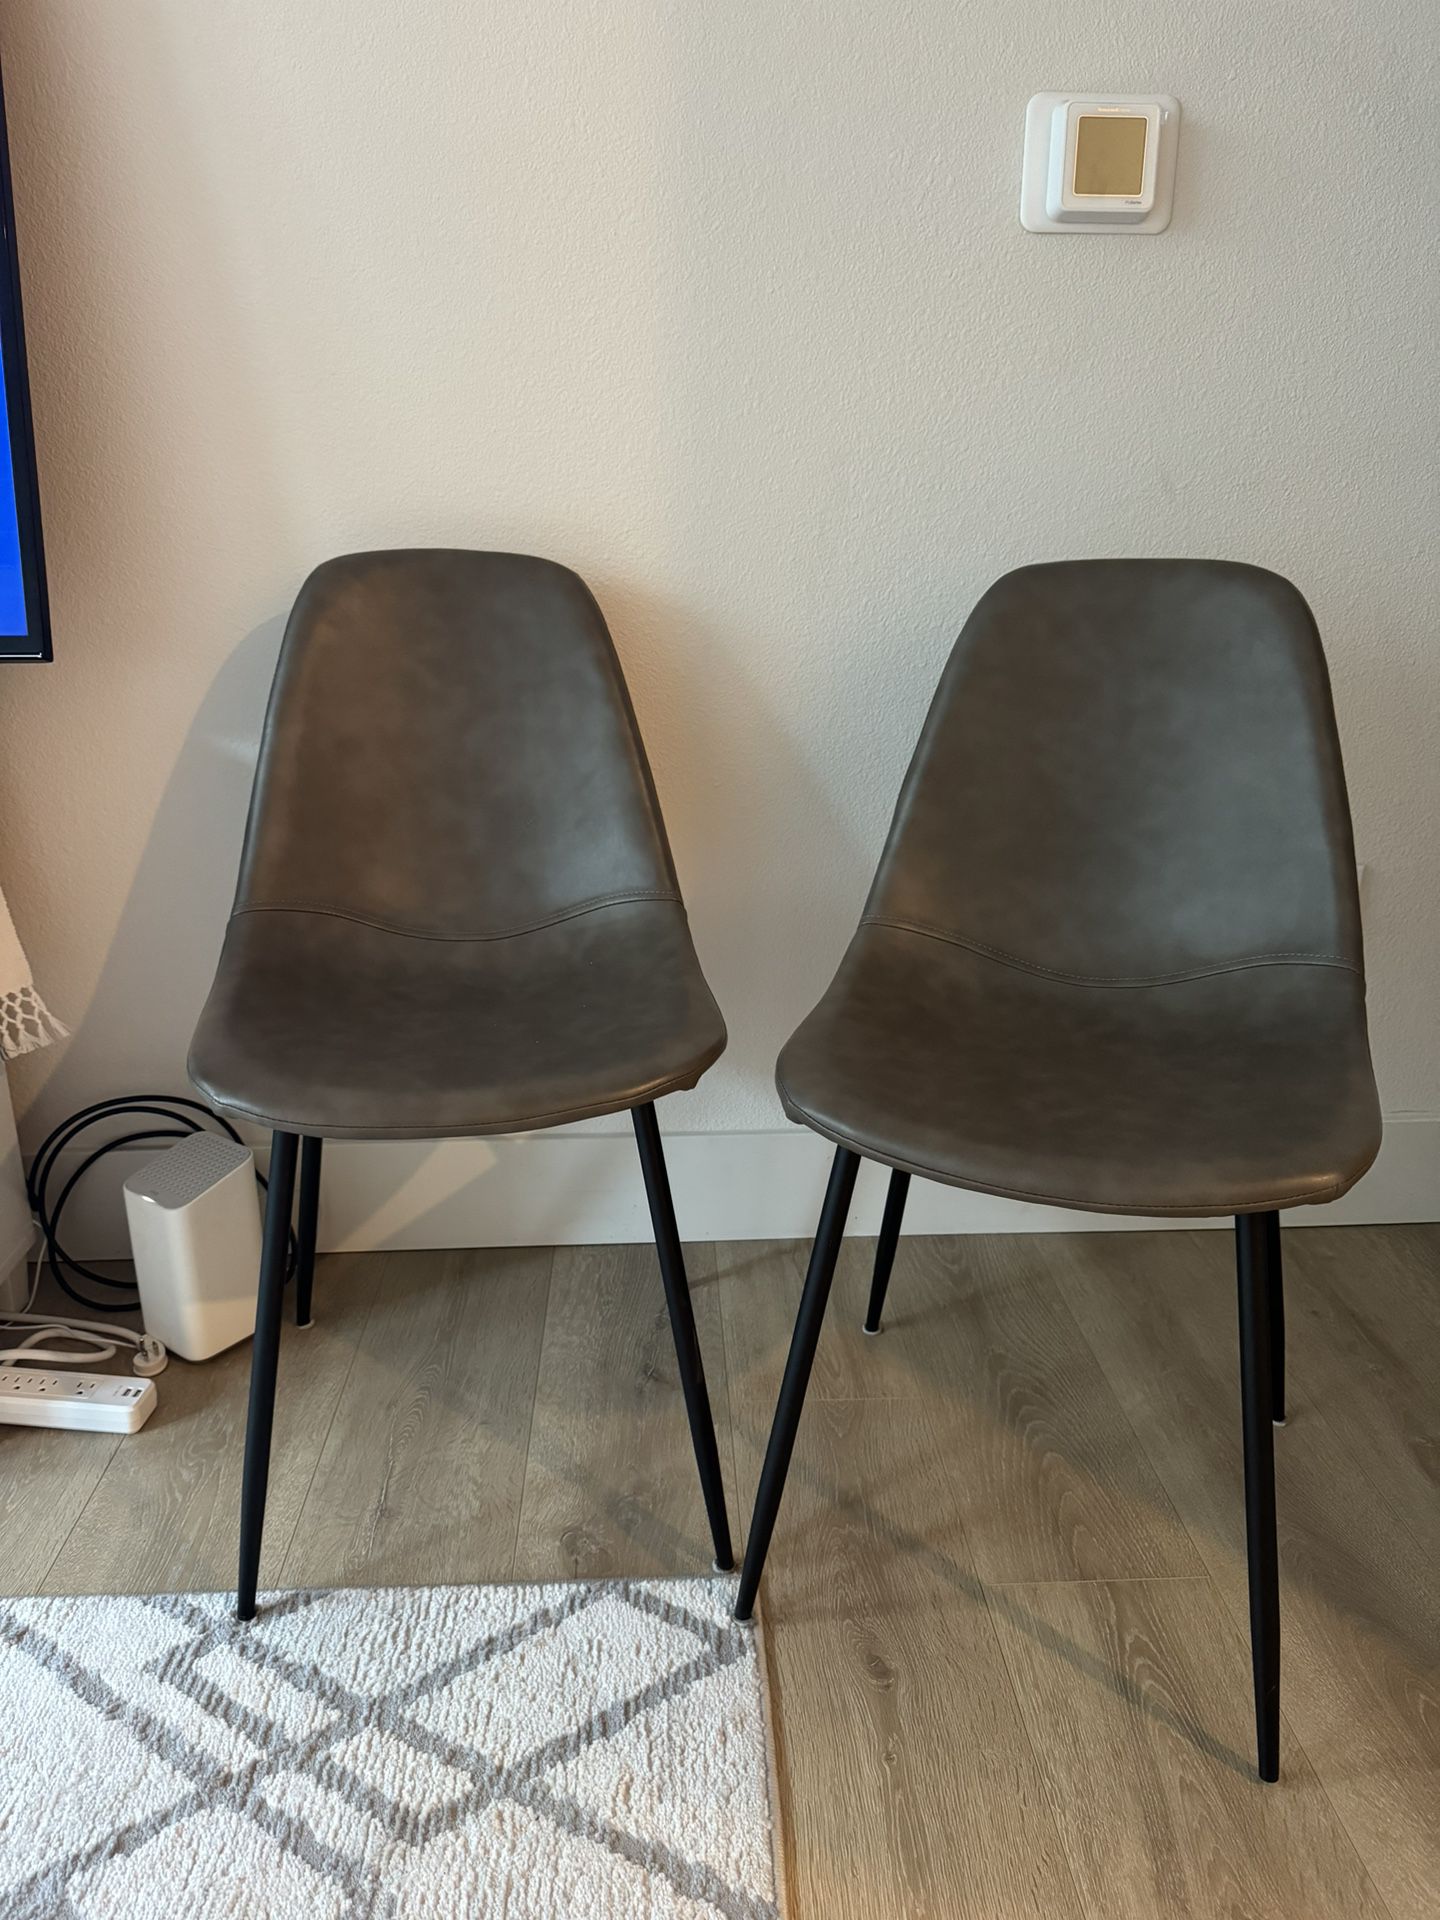 2 Table chairs 